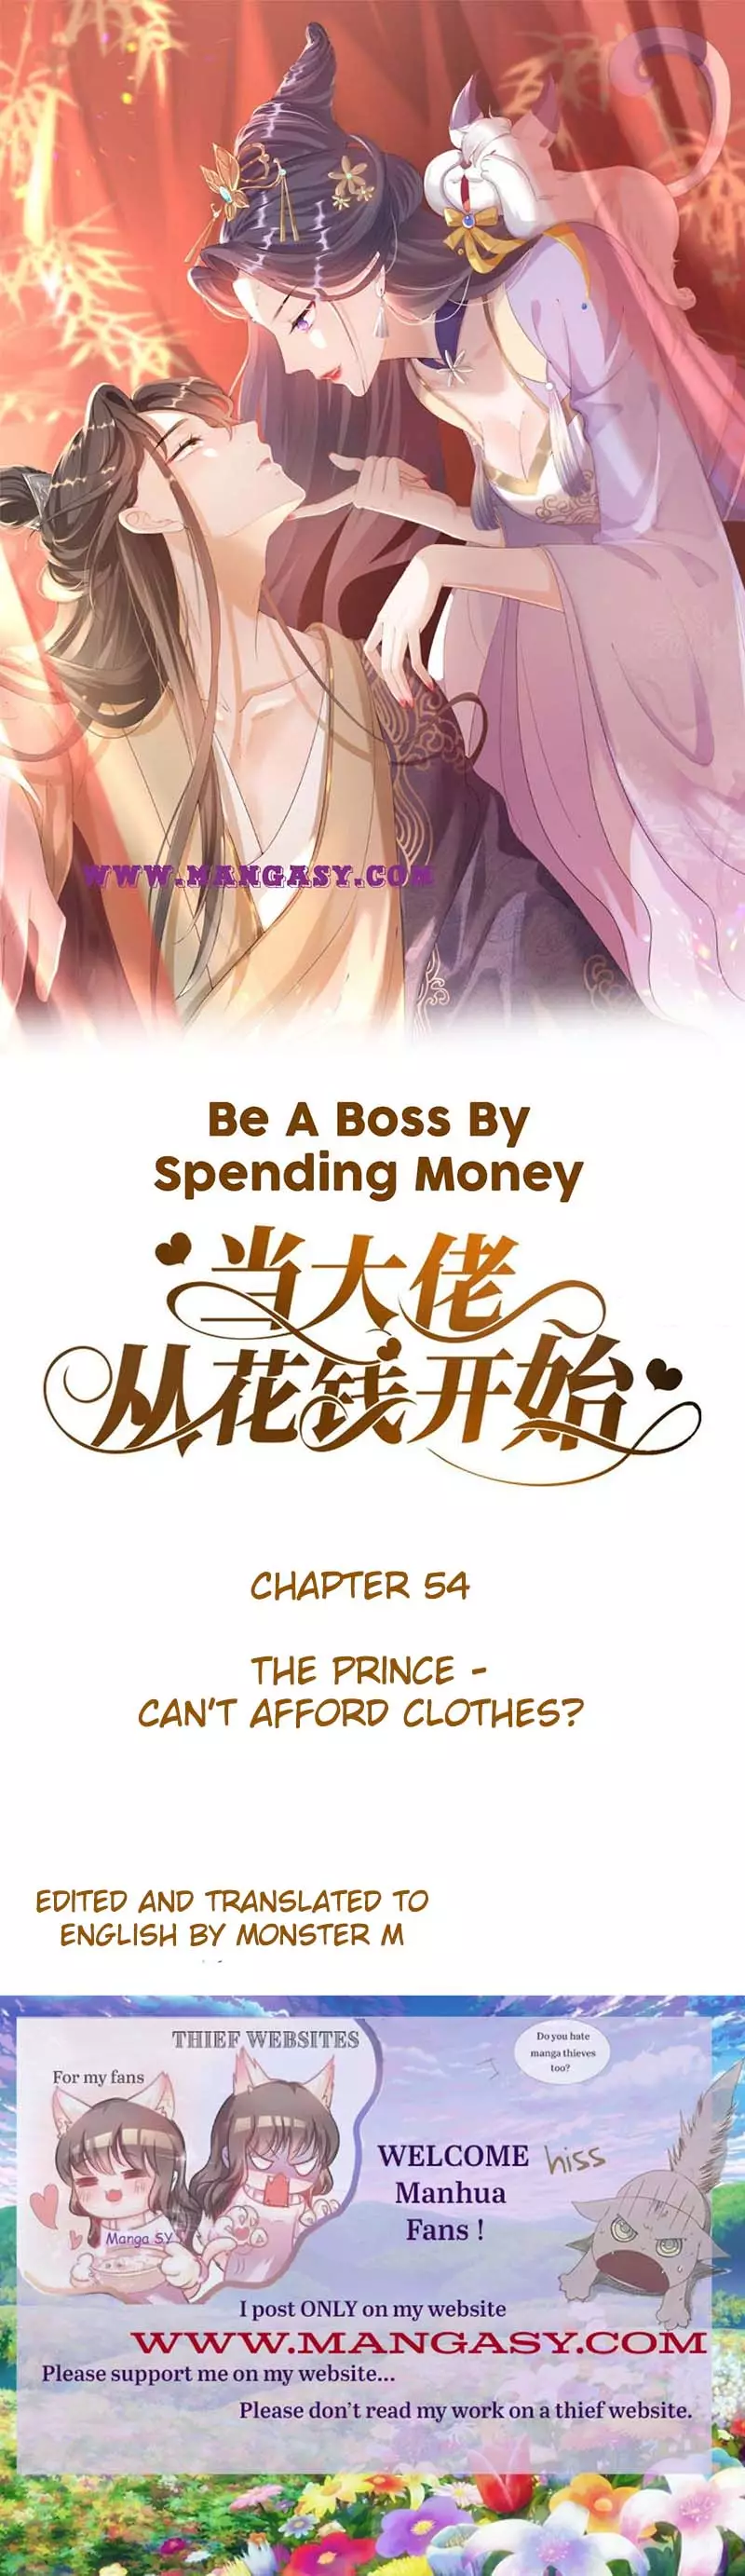 Becoming A Big Boss Starts With Spending Money - 54 page 1-b22ed419